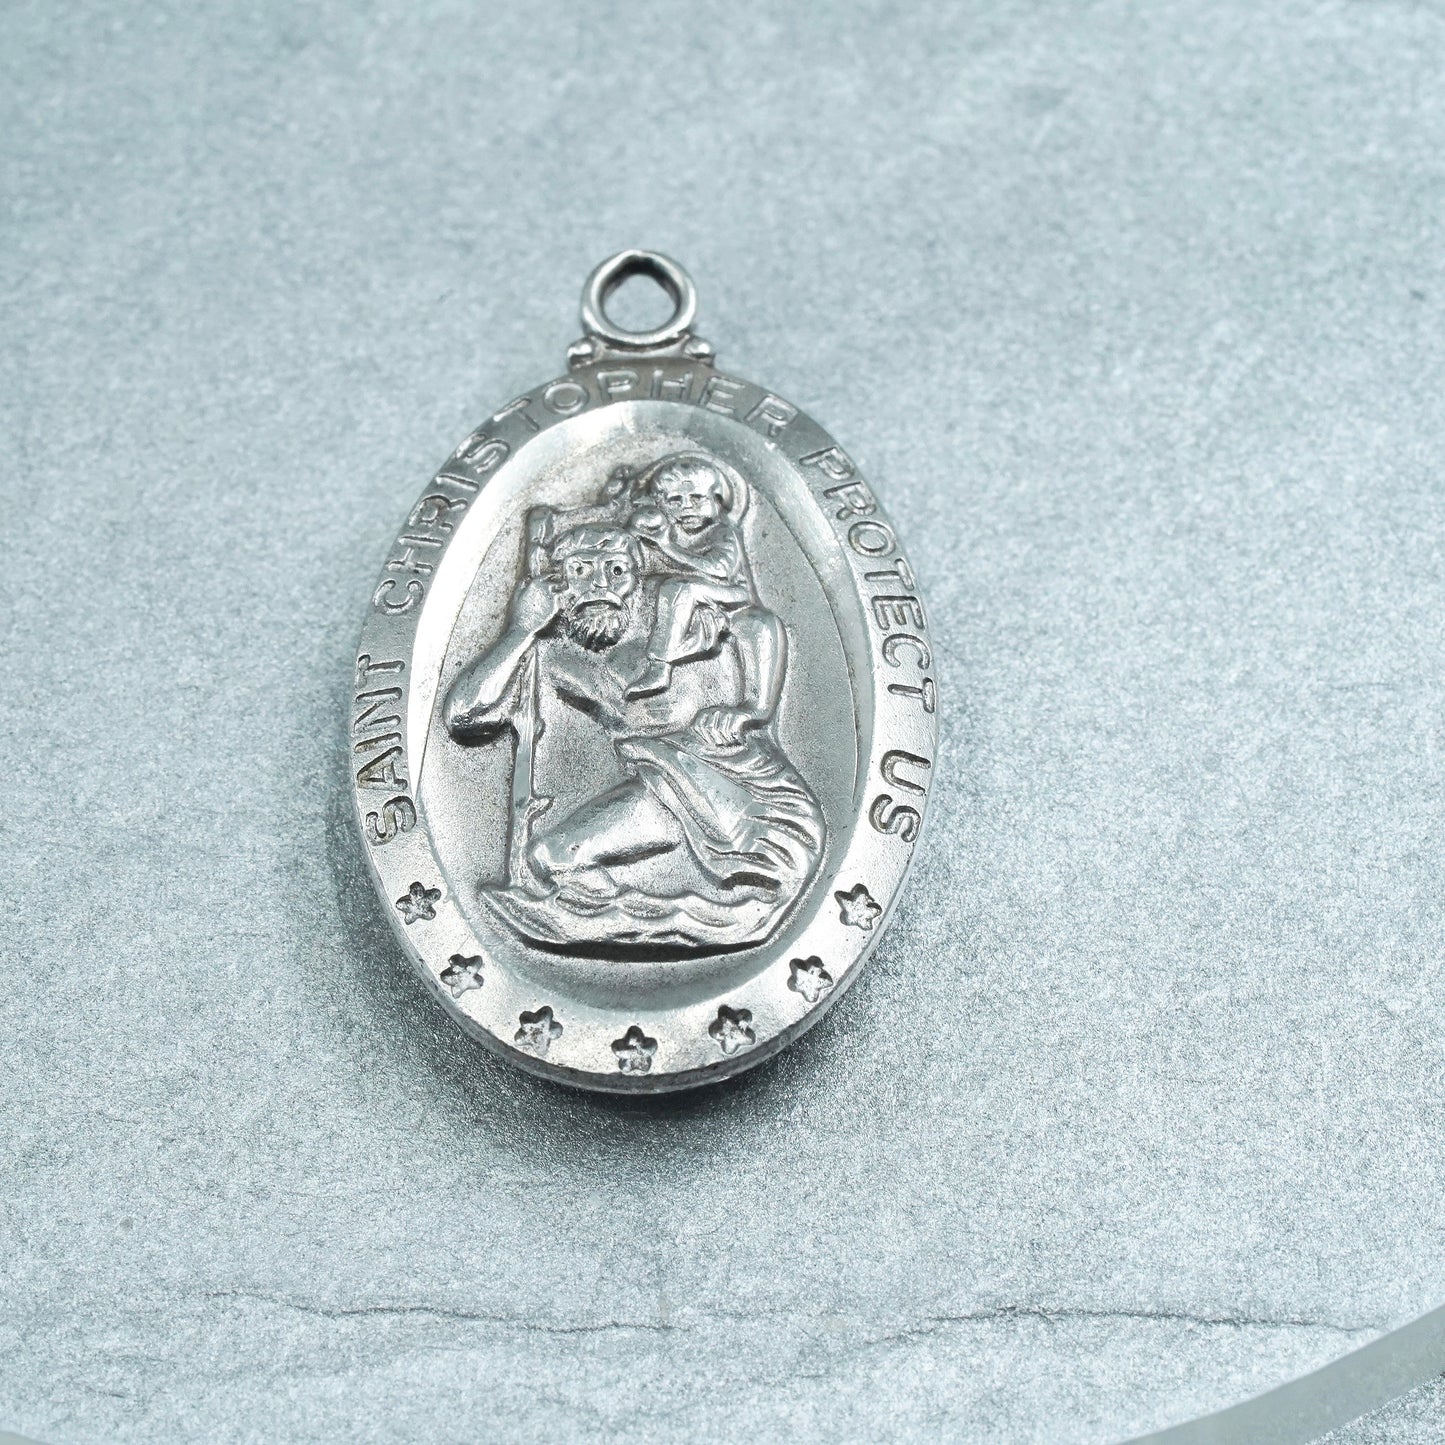 Vintage sterling 925 silver handmade ST. Christopher protect us pendant charm